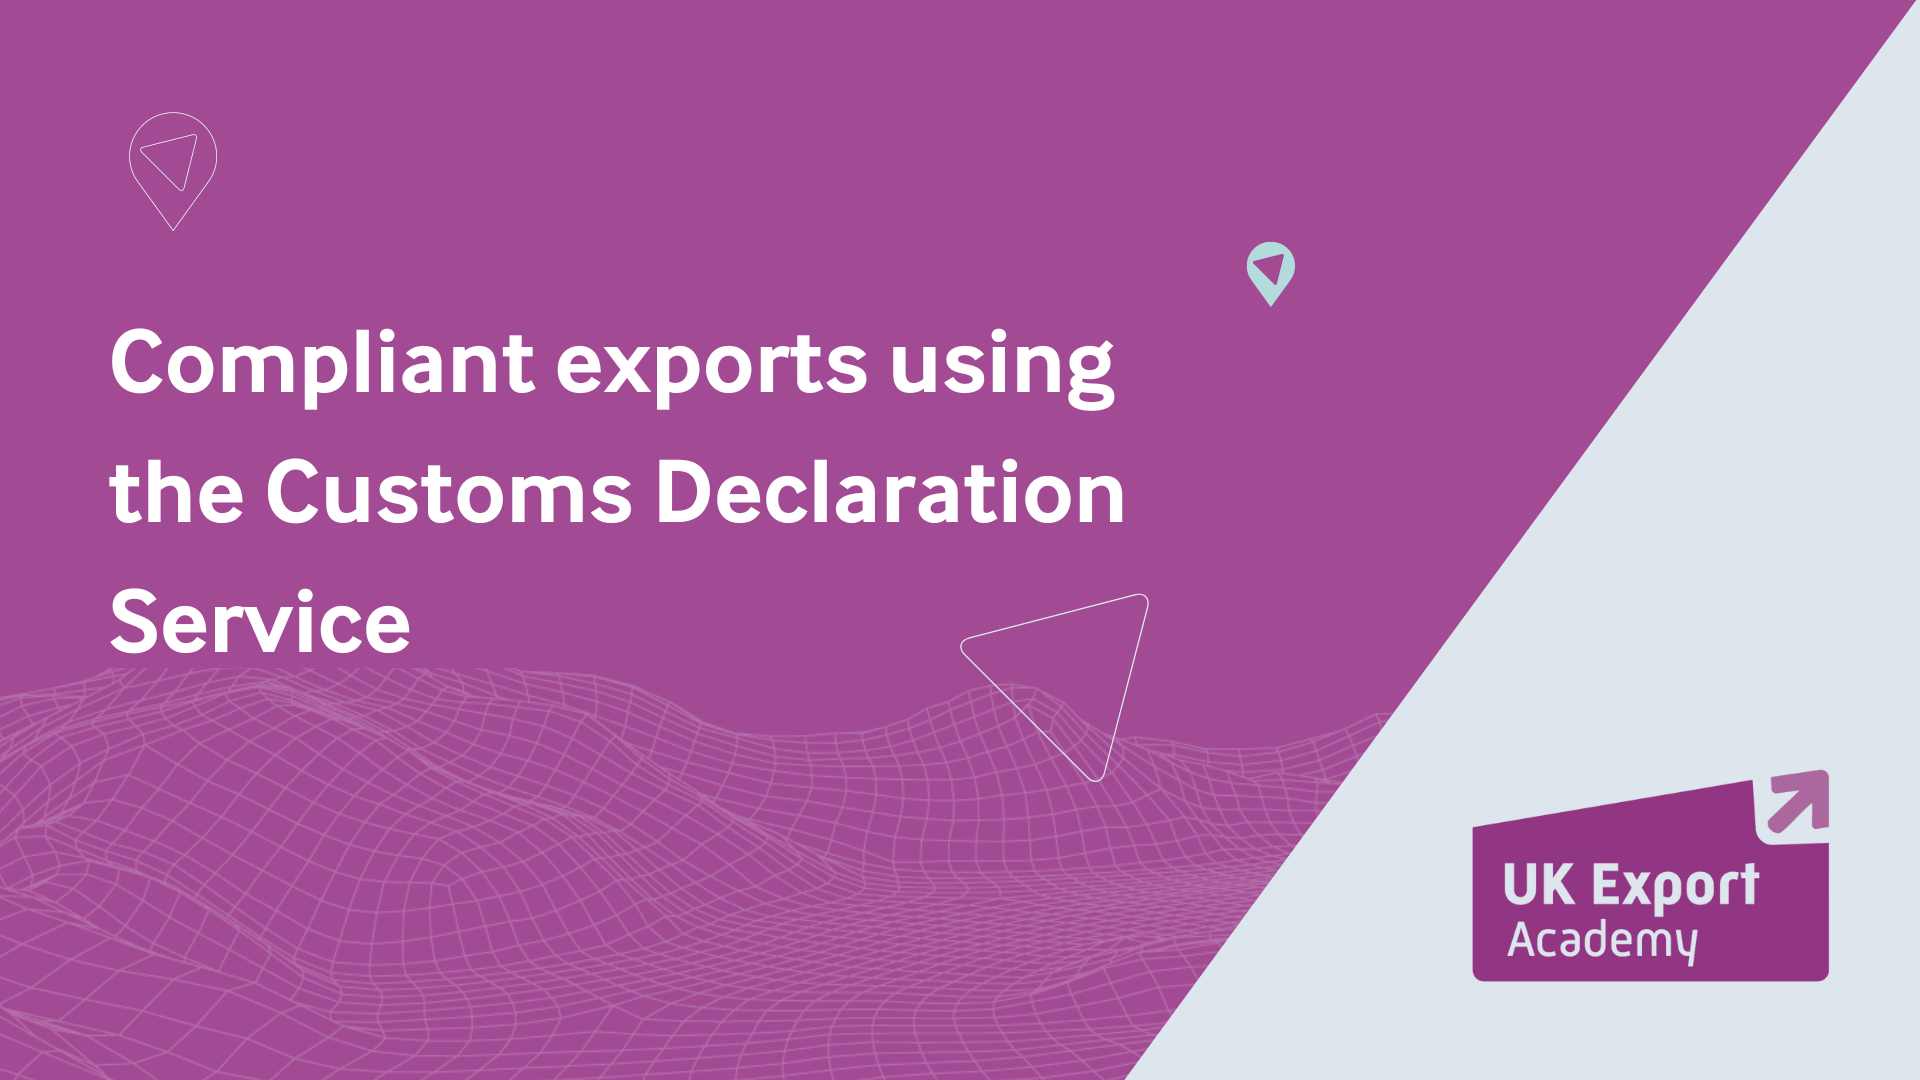 Compliant exports using the Customs Declaration Service